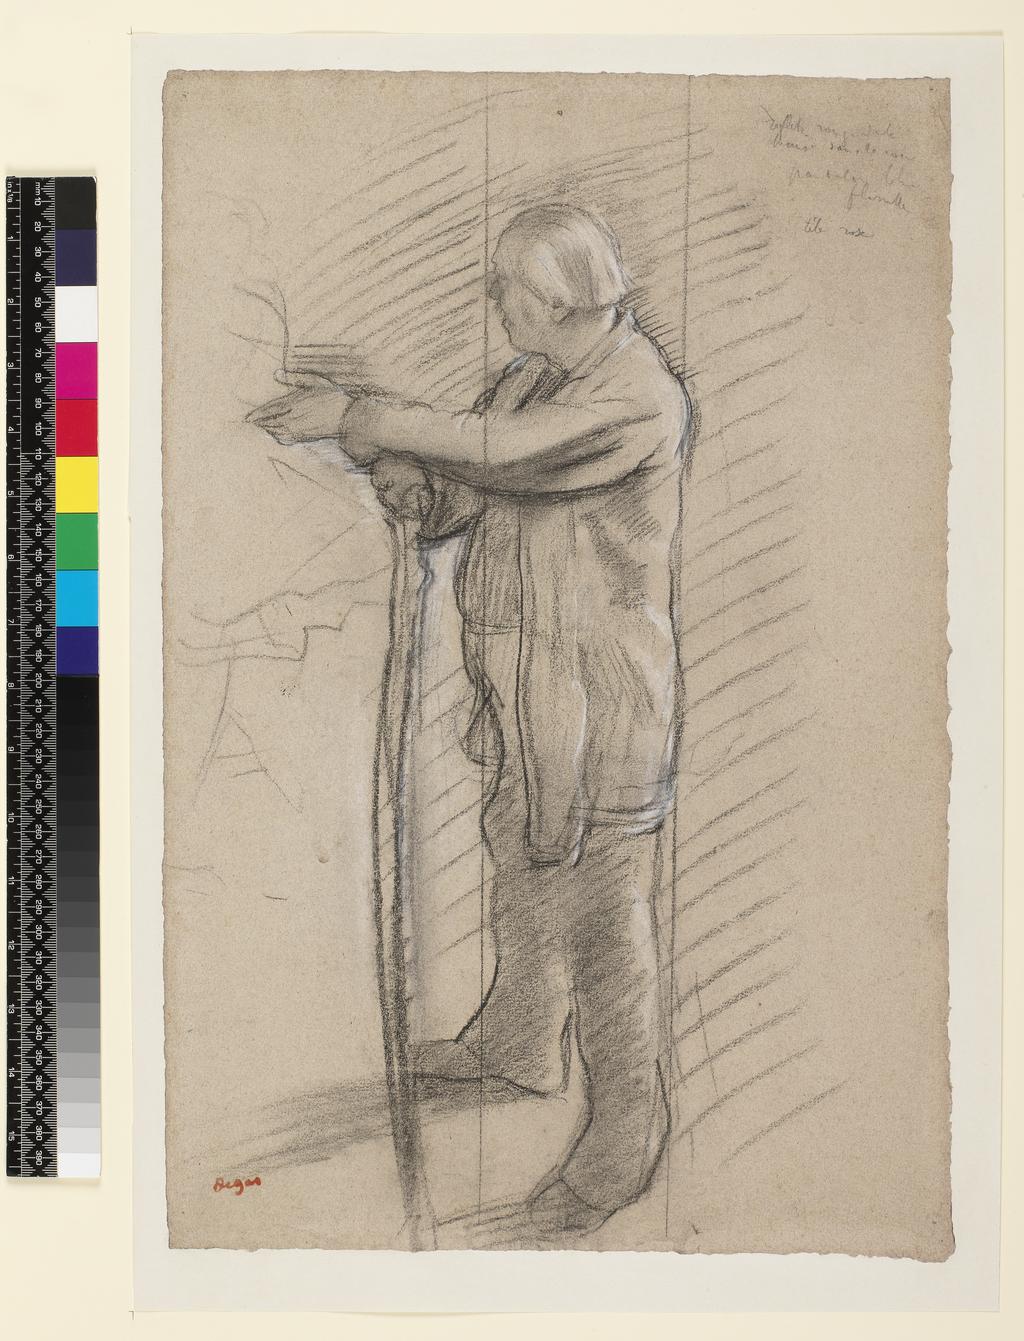 An image of Portrait of the Dancer Jules Perrot. Degas, Edgar (French, 1834-1917). Black chalk, conté? crayon, charcoal heighlighted with white, on paper, height, 470 mm, width, 312 mm, 1875.